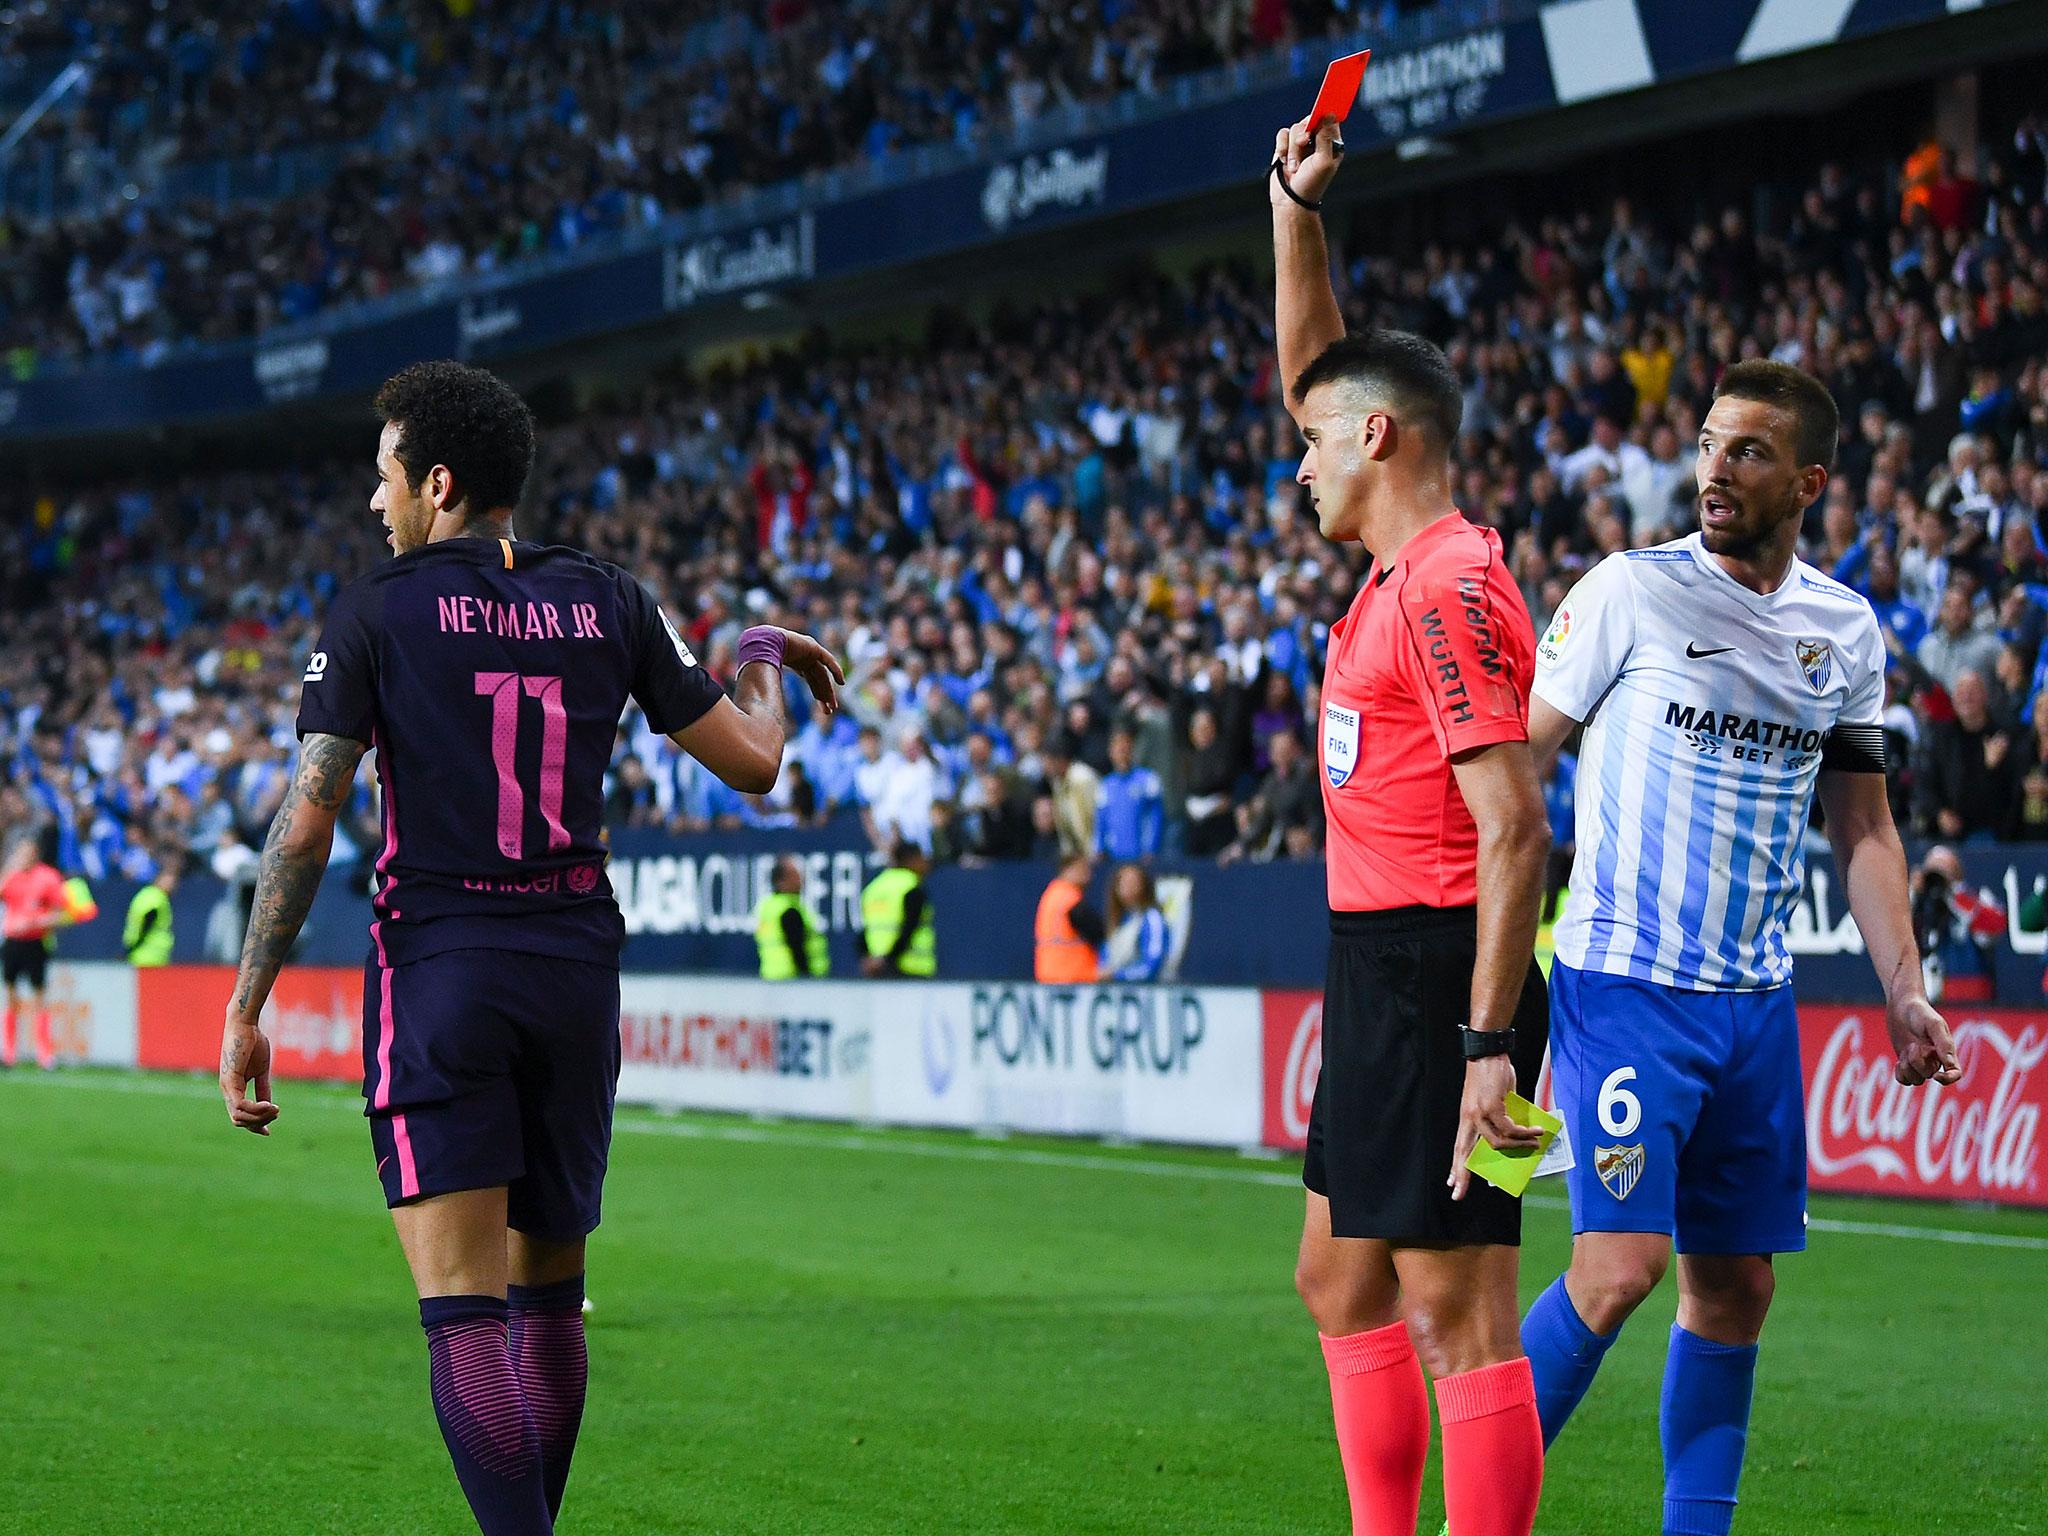 Neymar was handed a three-match ban after his red card at Malaga